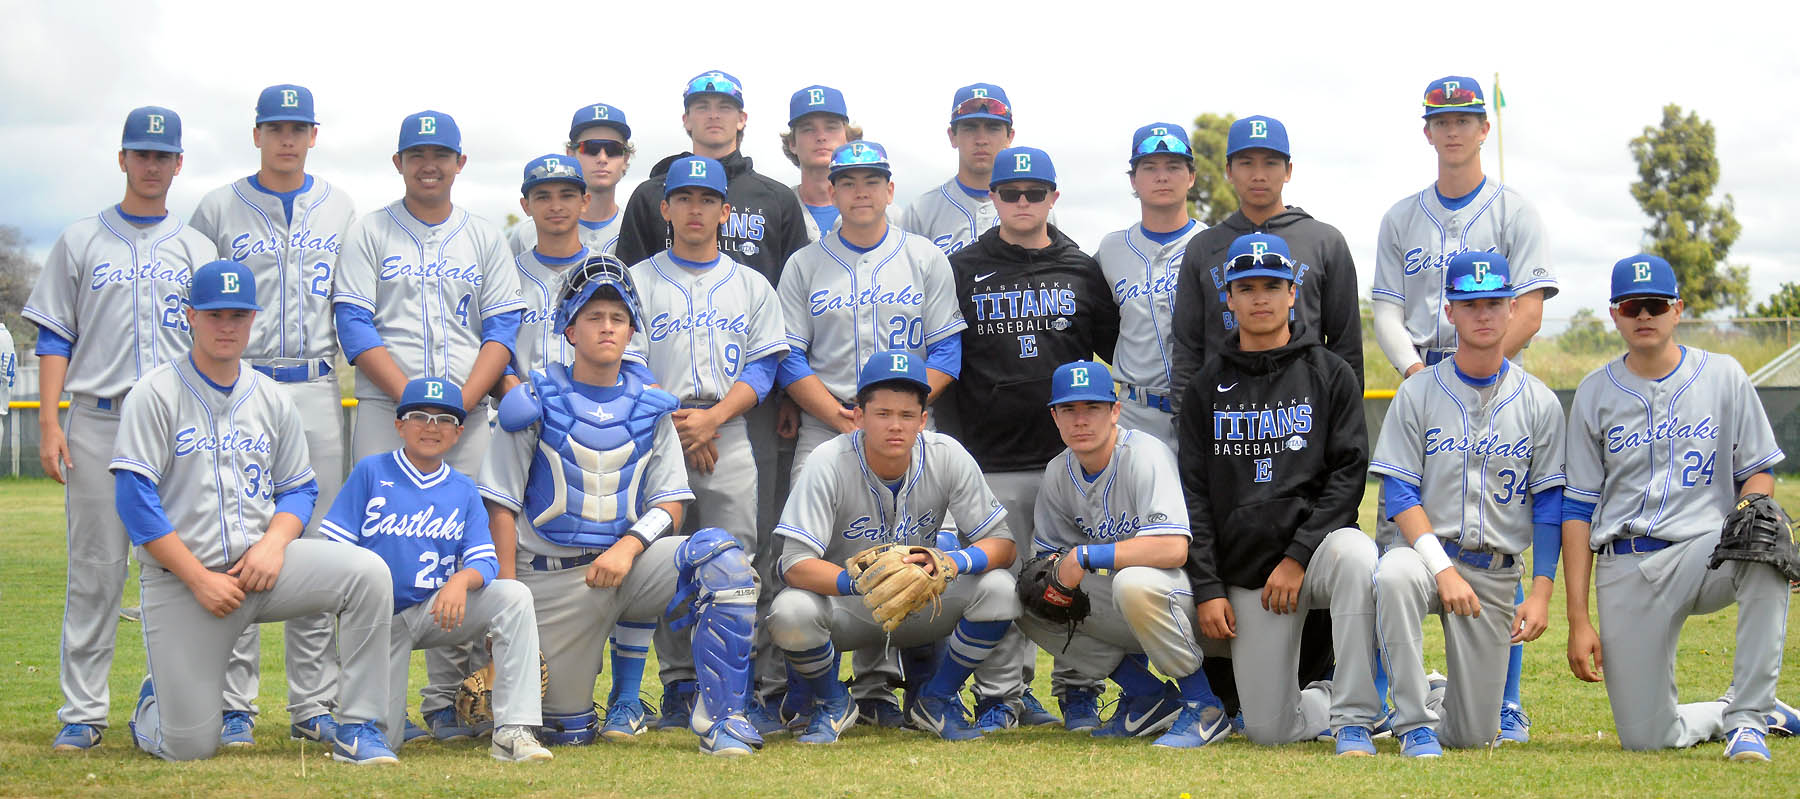 Titan baseball team is back on top of section rankings | The Star News